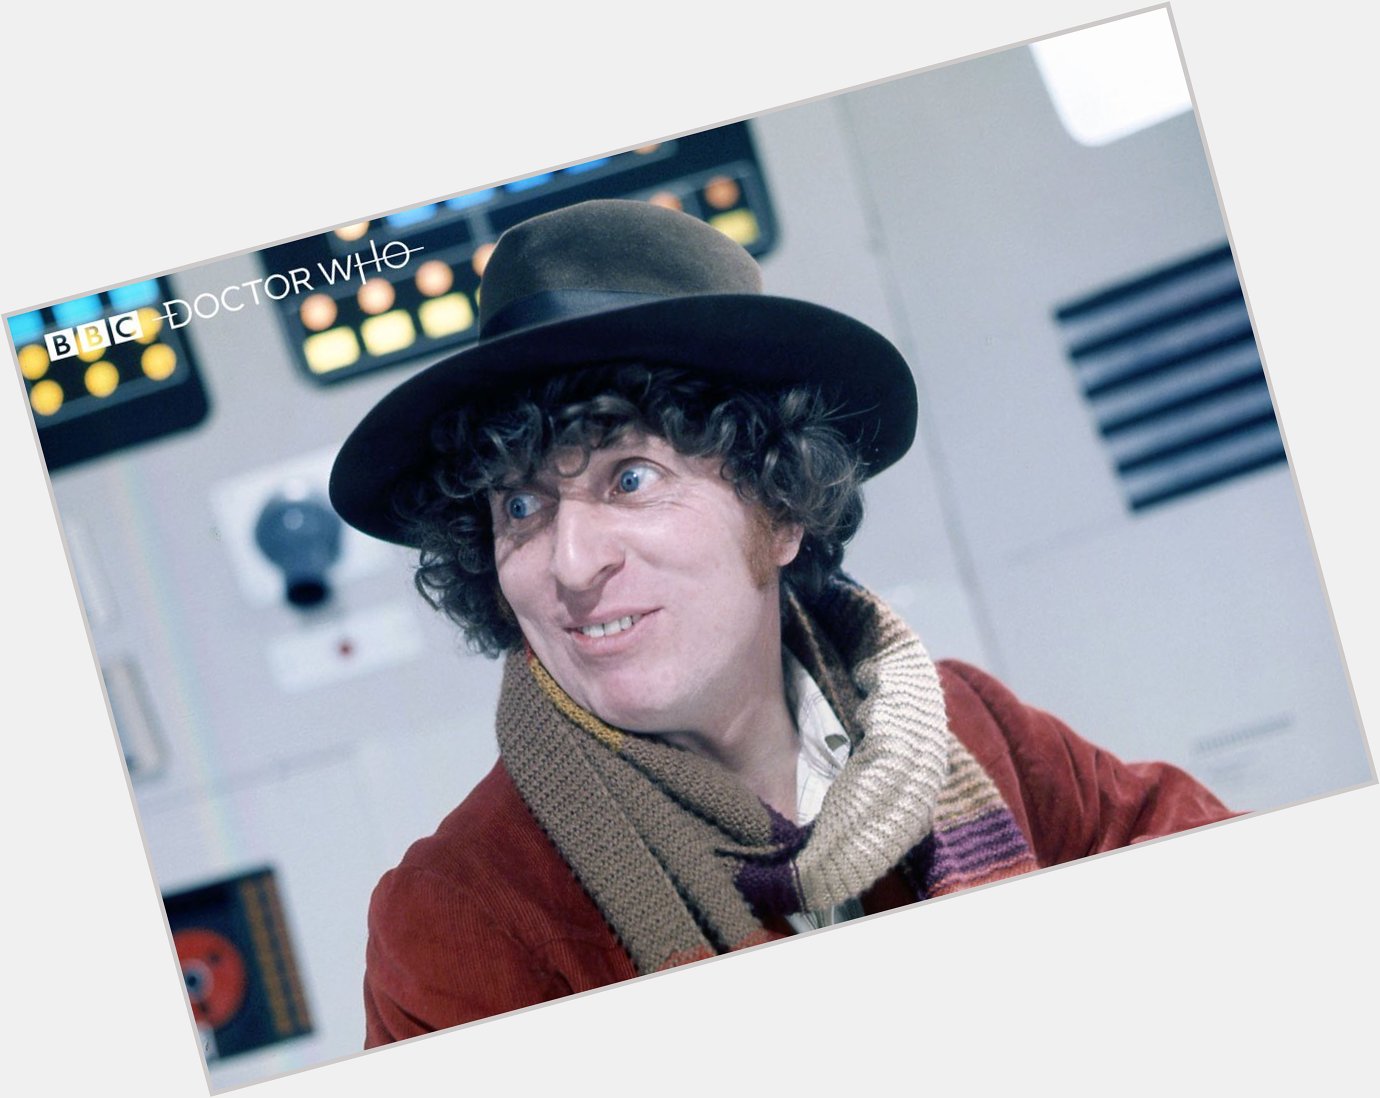 Happy birthday to the wonderful Tom Baker, the Fourth Doctor!  